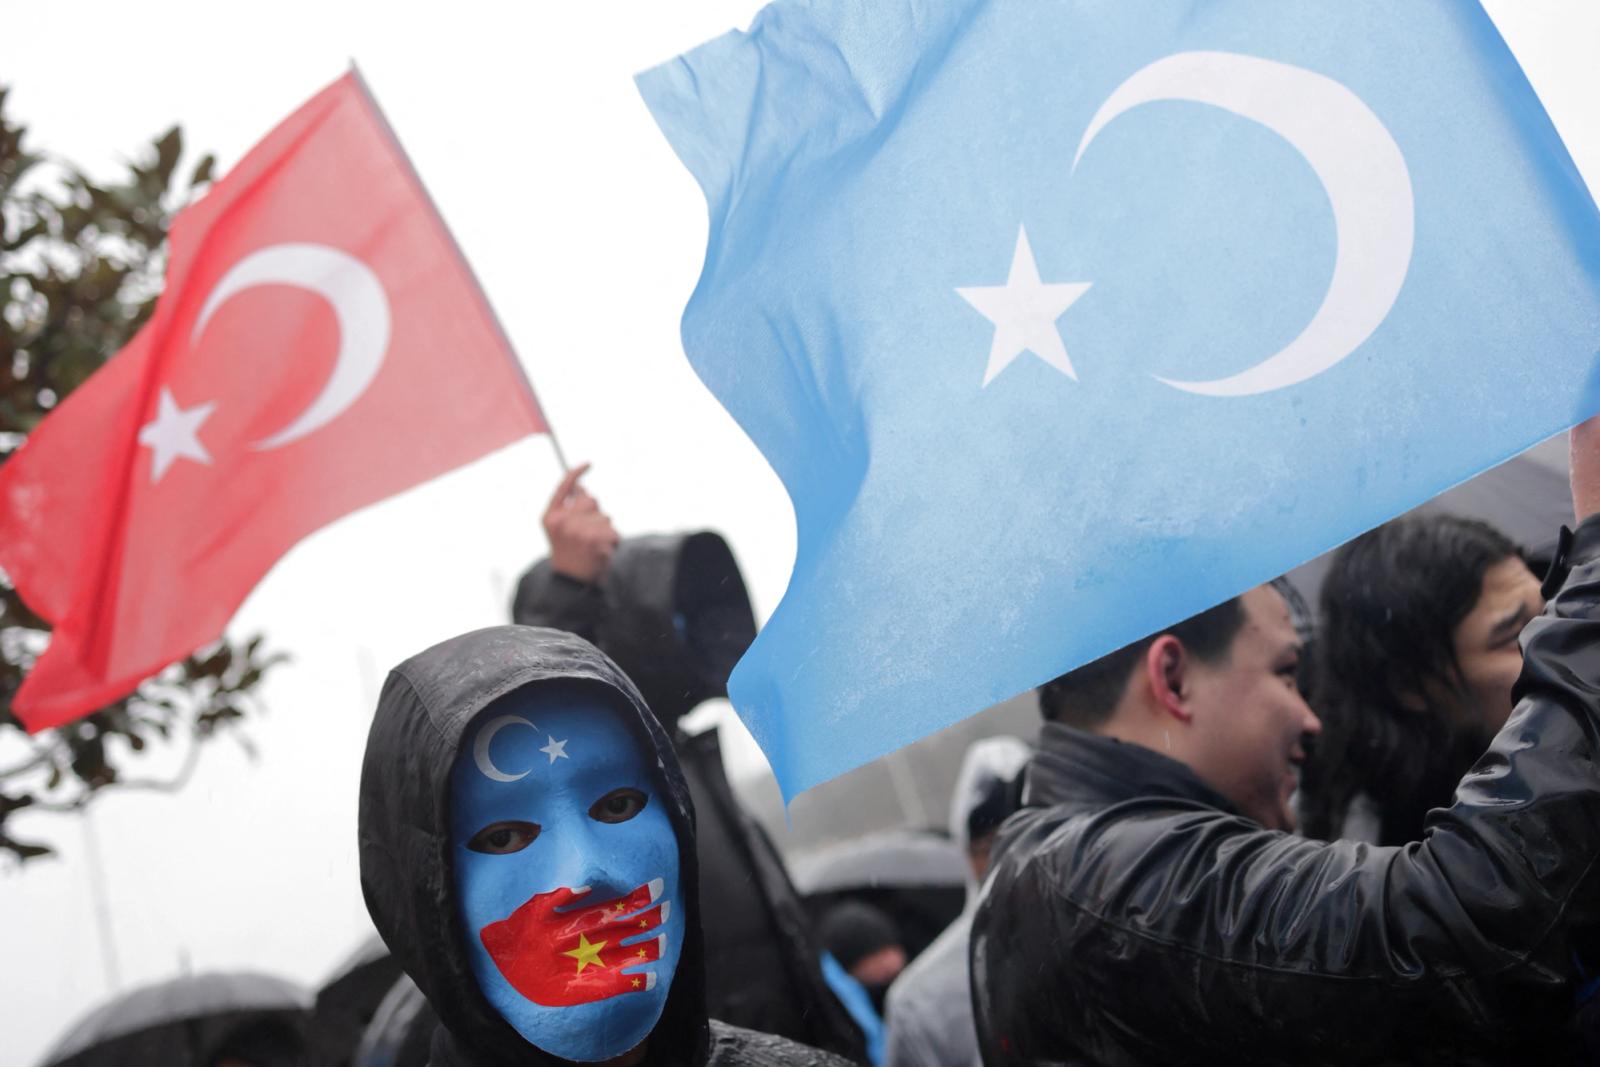 Ethnic Uyghur demonstrators wave flags of Turkey and East Turkestan during a protest against China, near the Chinese consulate in Istanbul, Turkey February 5, 2023. REUTERS/Murad Sezer